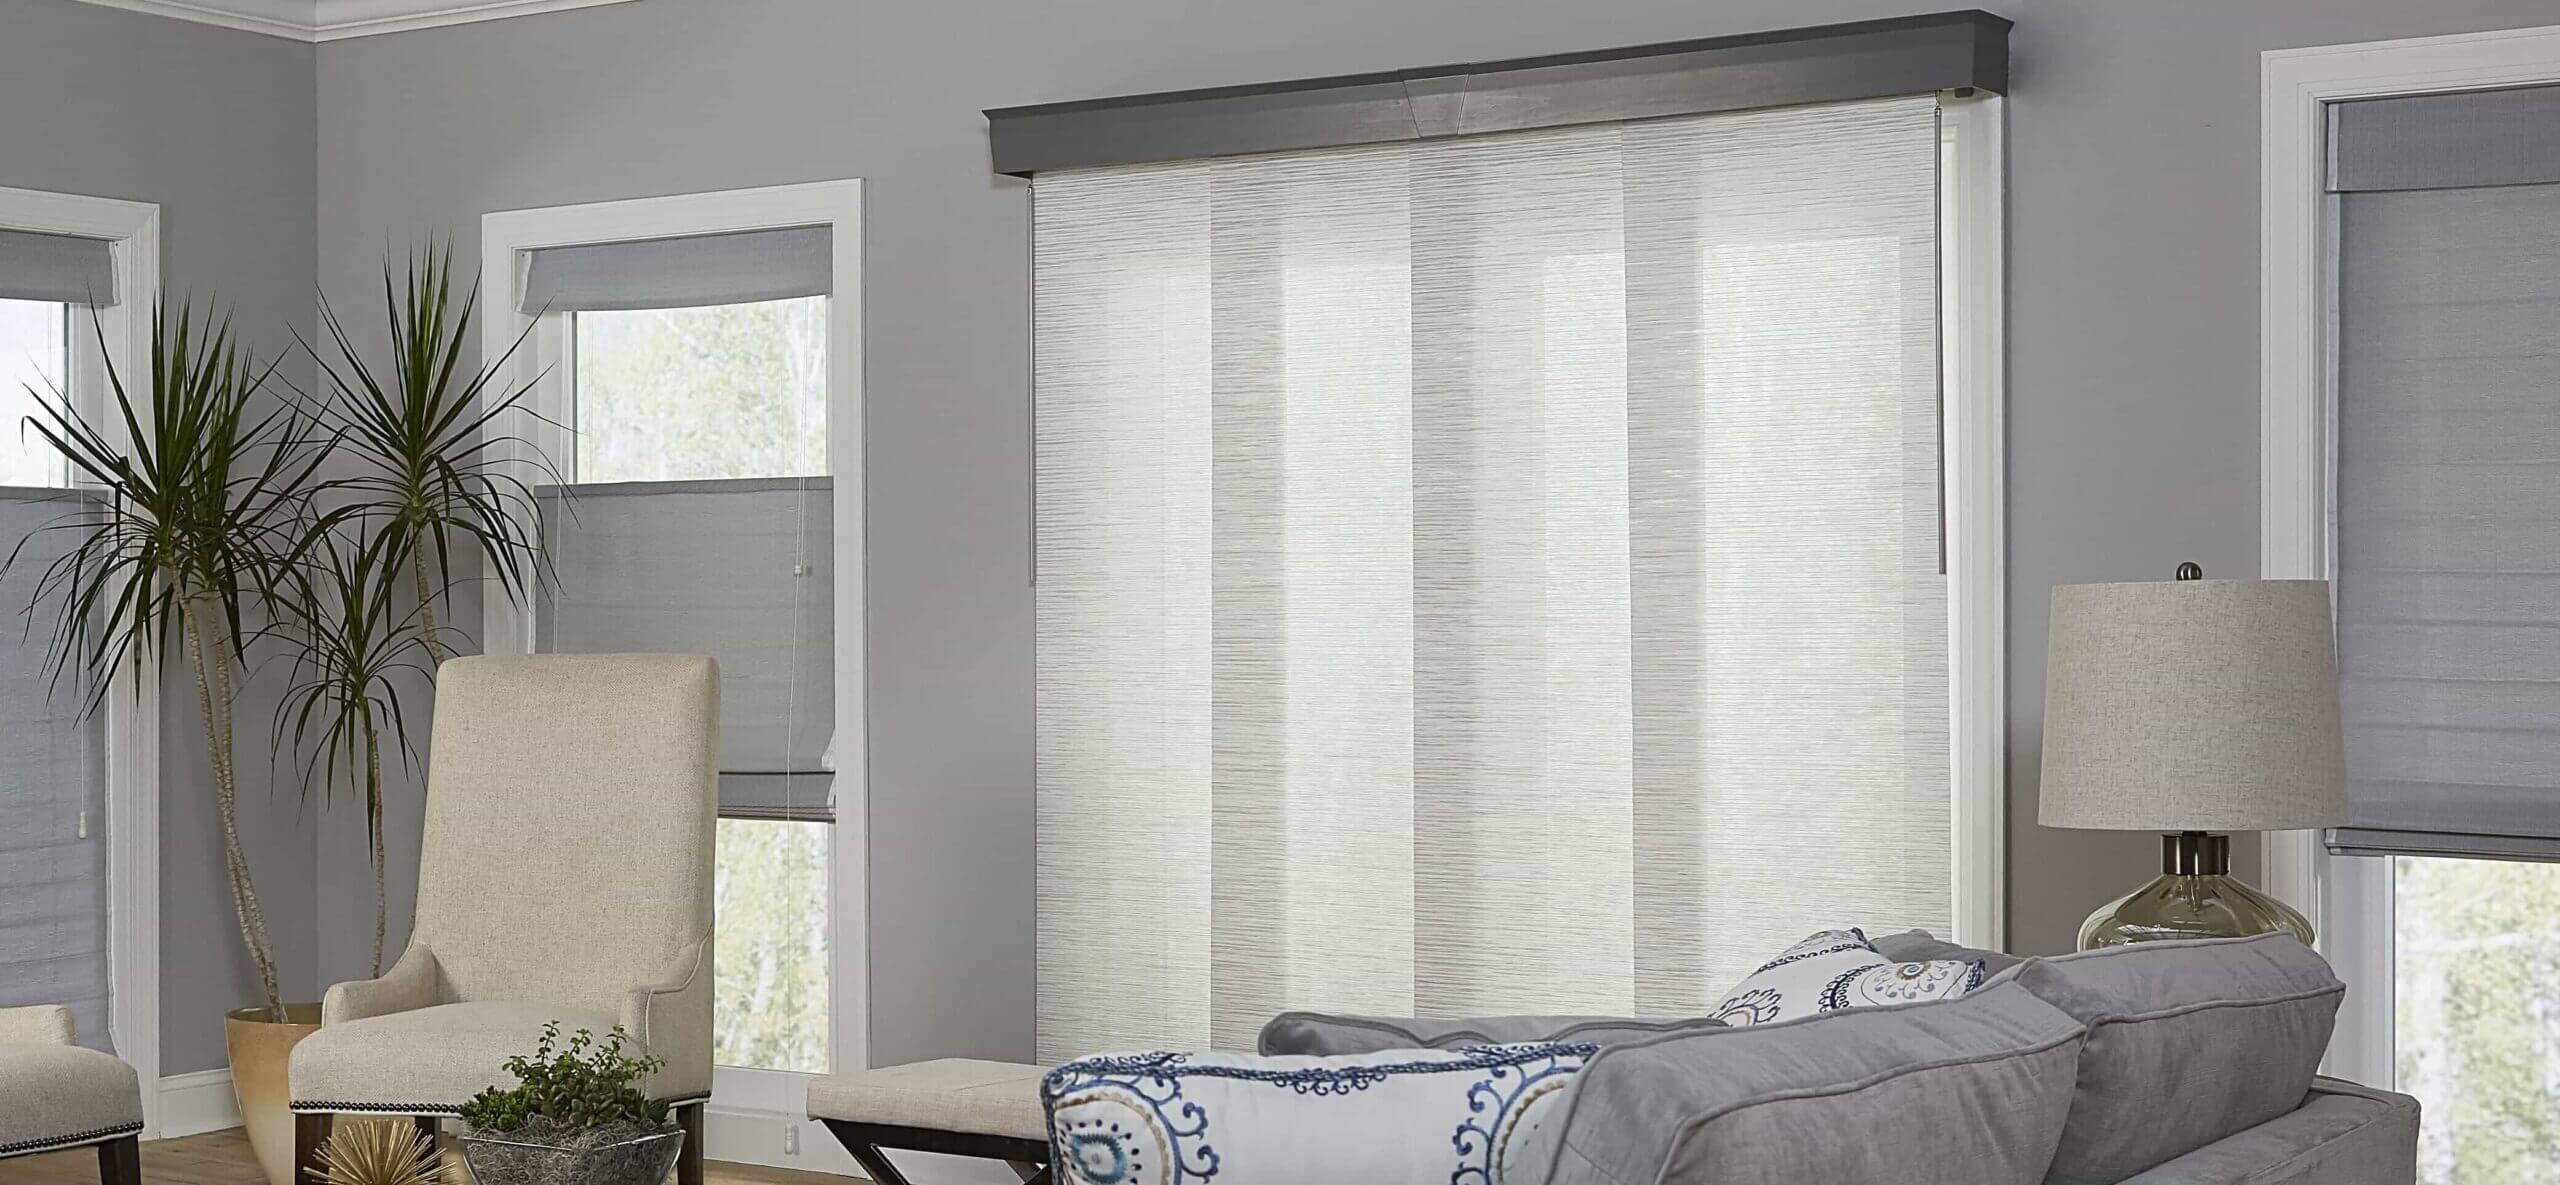 Rock Hill - Panel Track Blinds